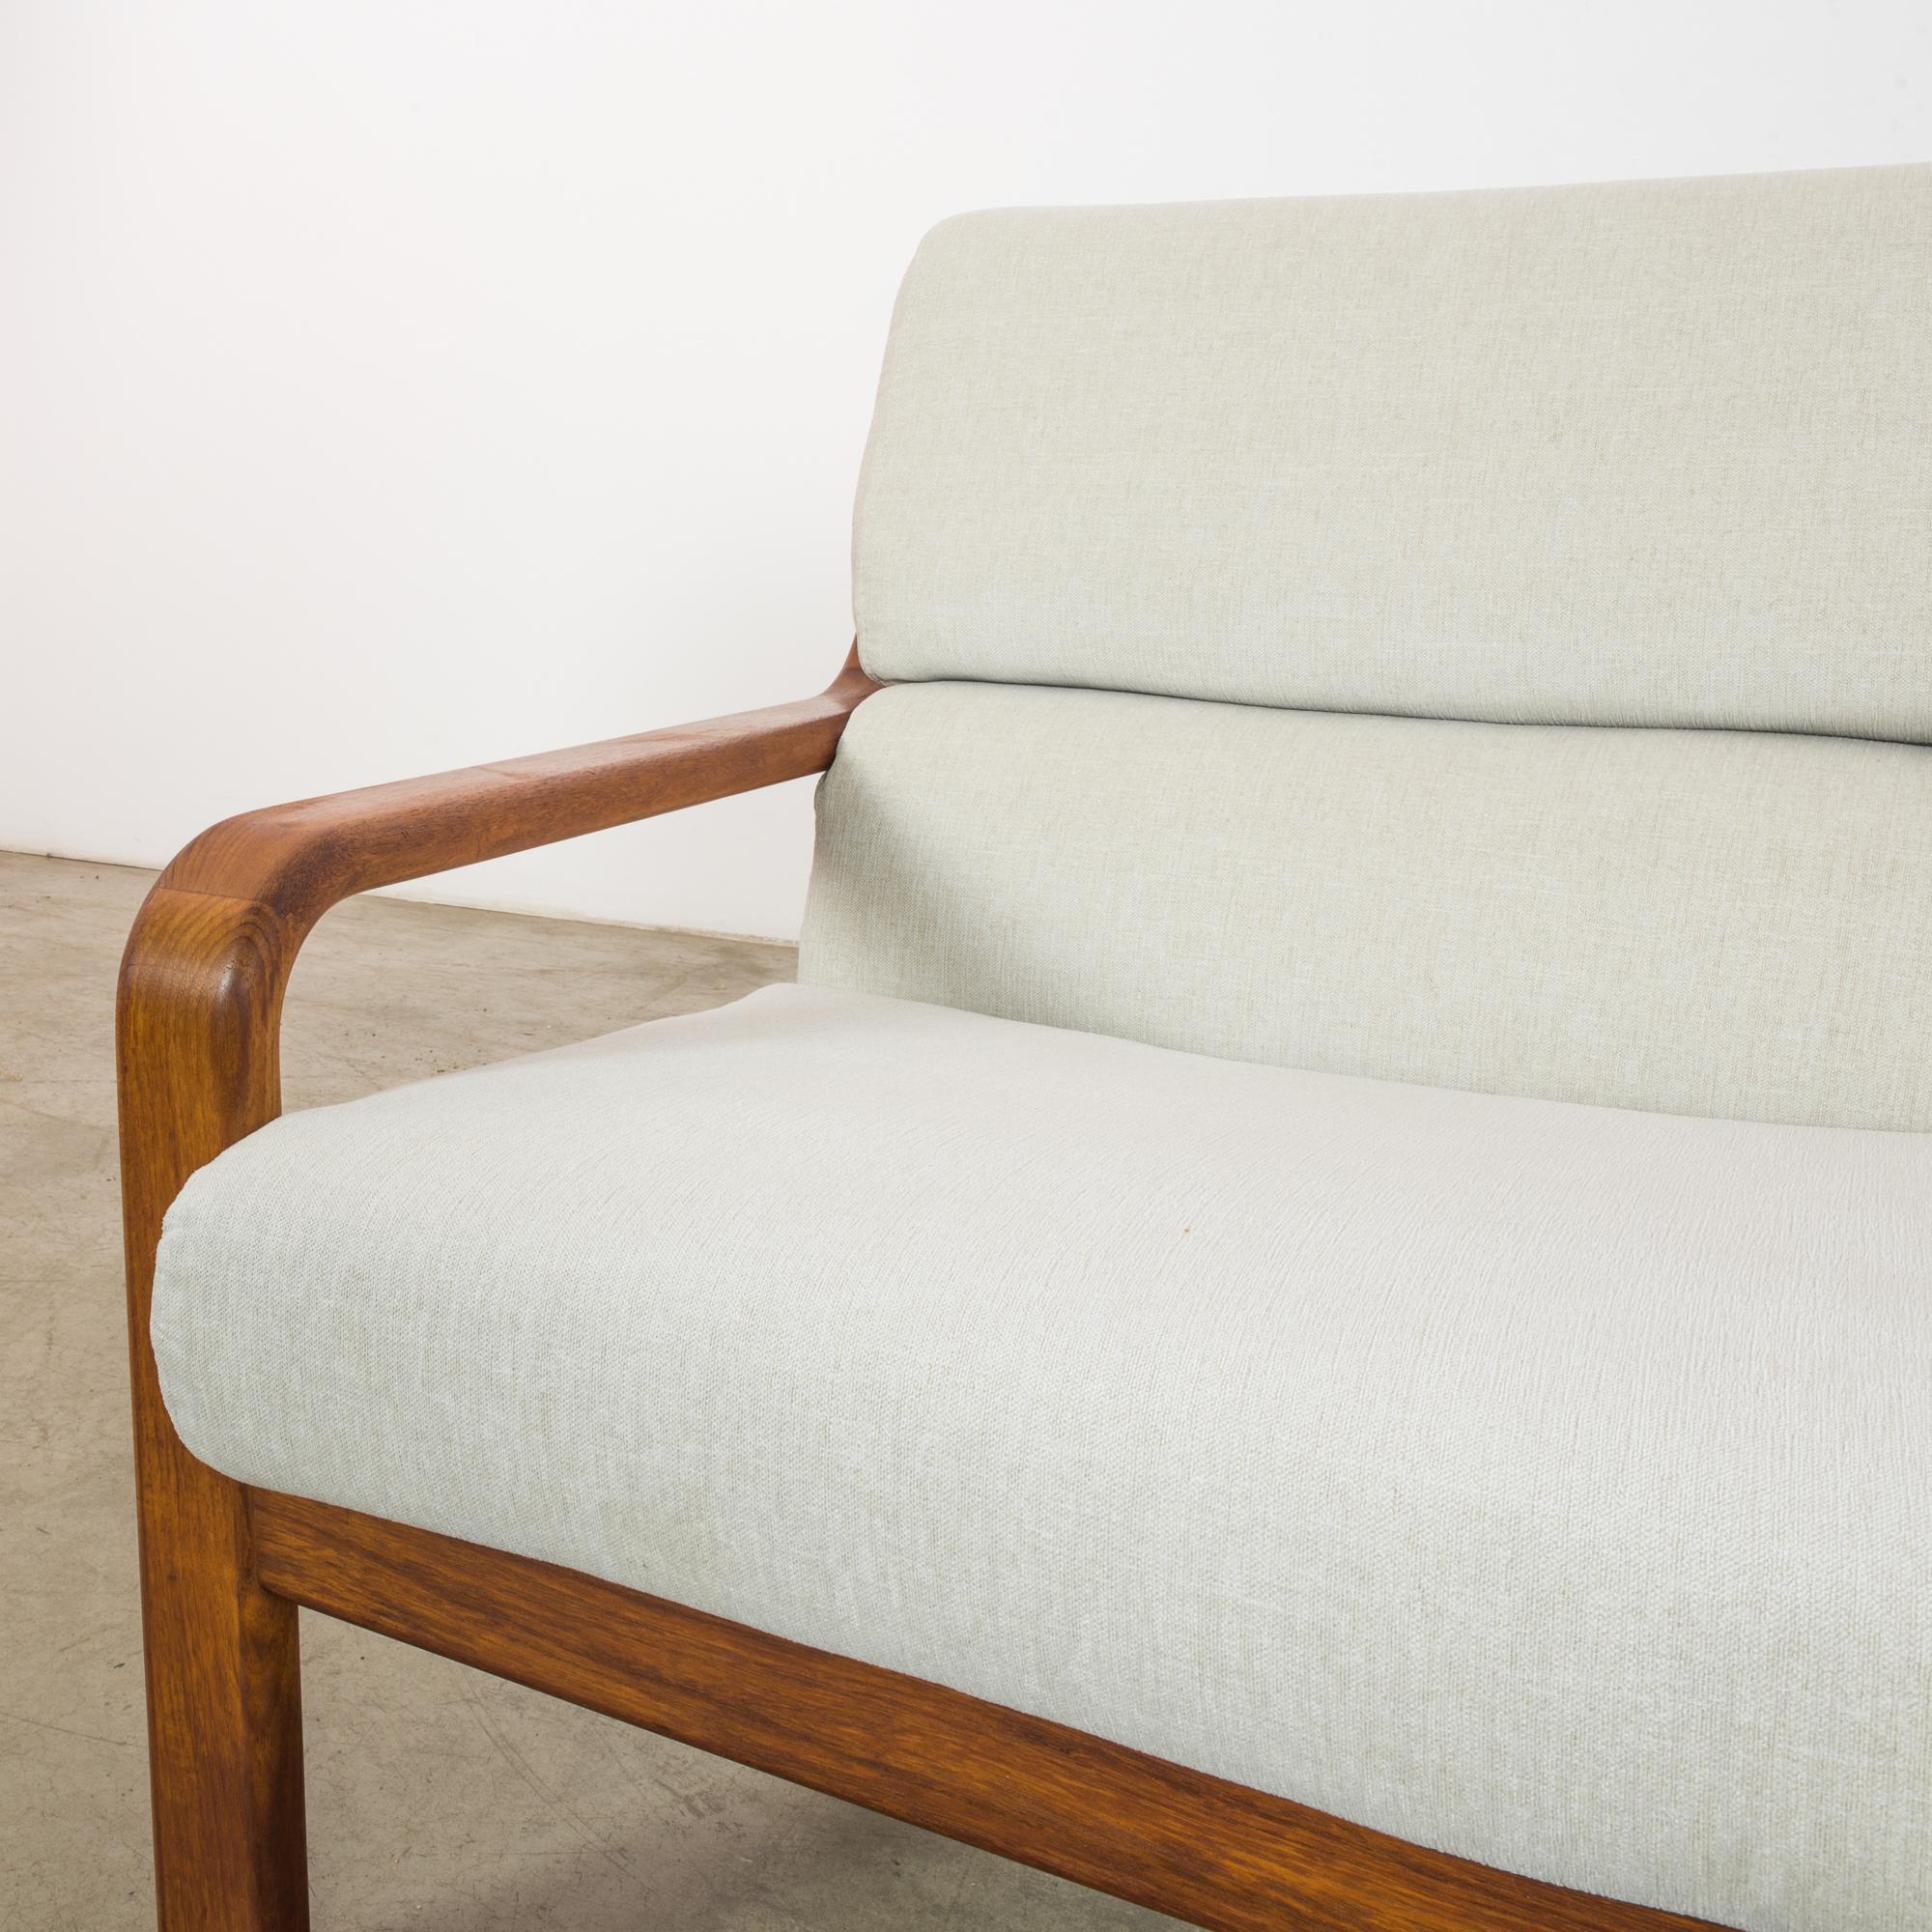 1960s Danish Teak Sofa with Upholstered Seat and Back 2